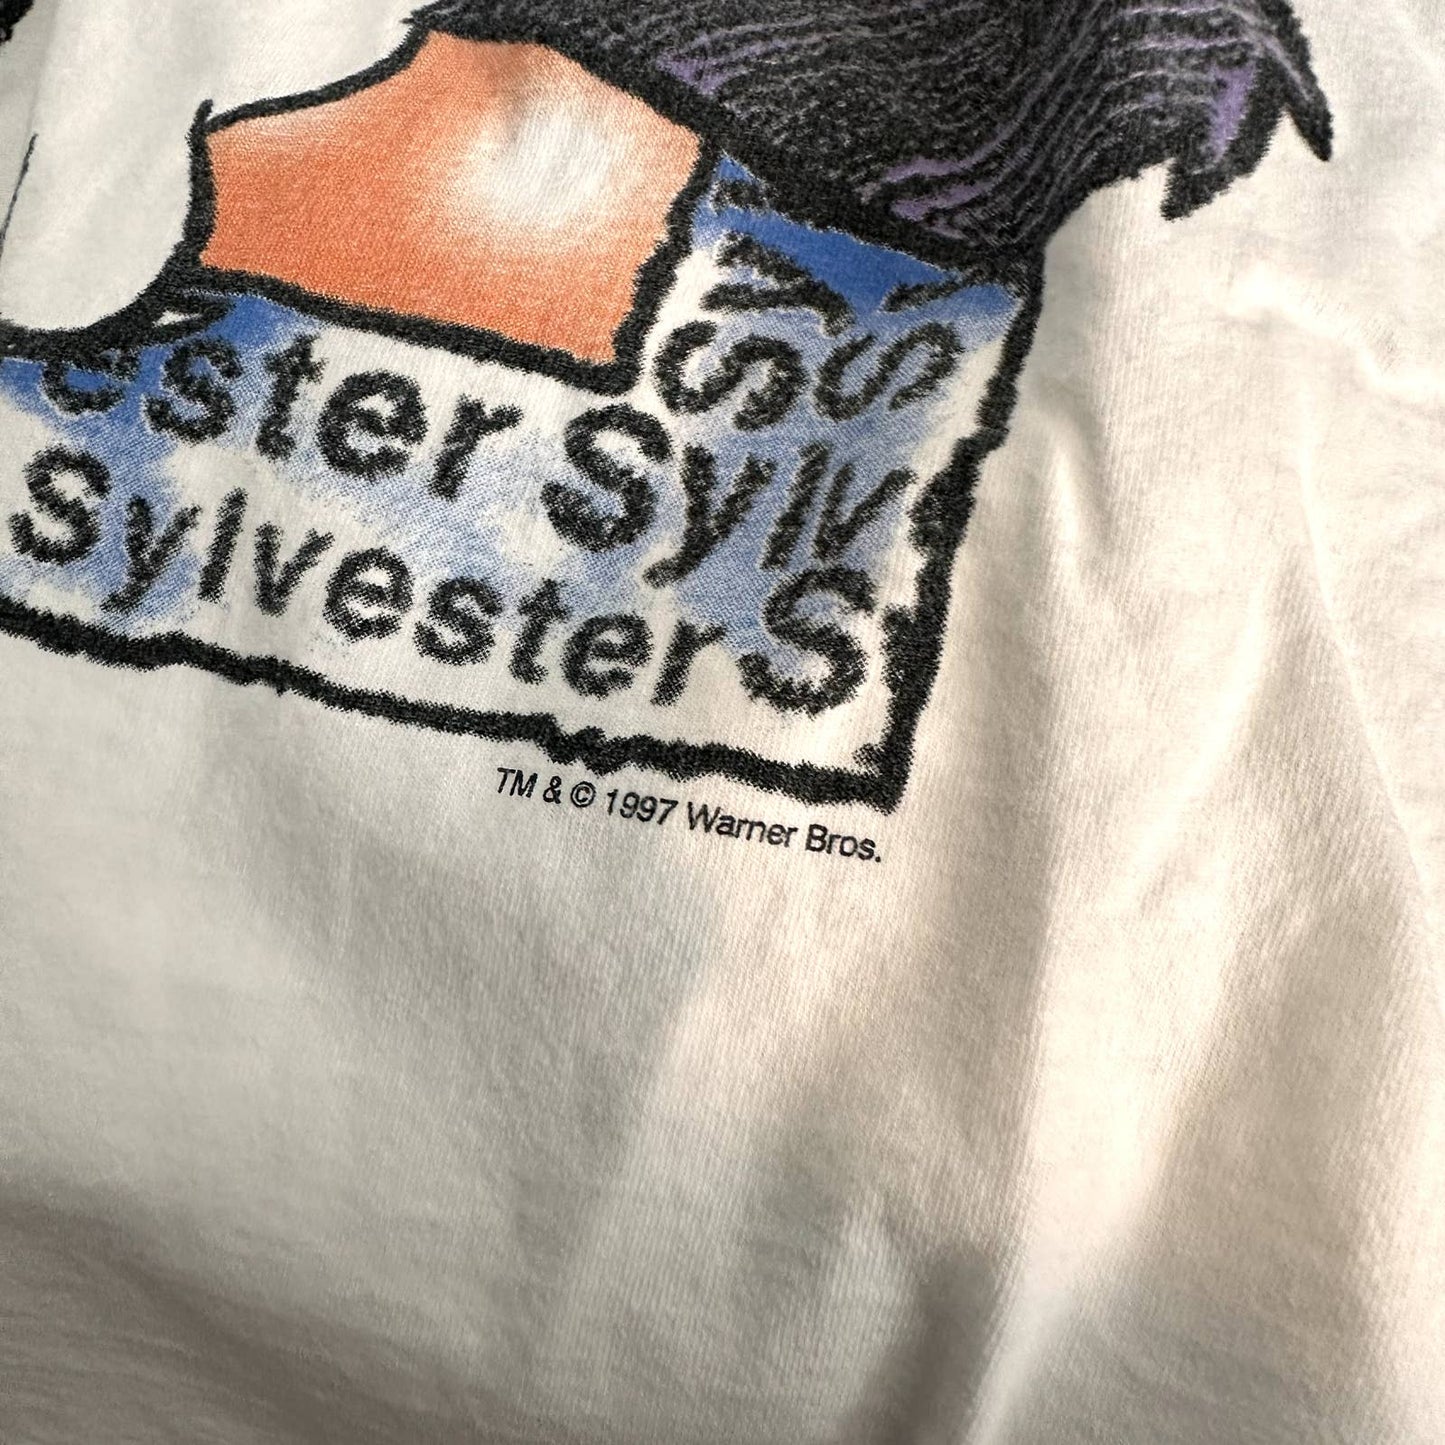 Vintage Sylvester Looney Tunes Shirt 90s Size Large